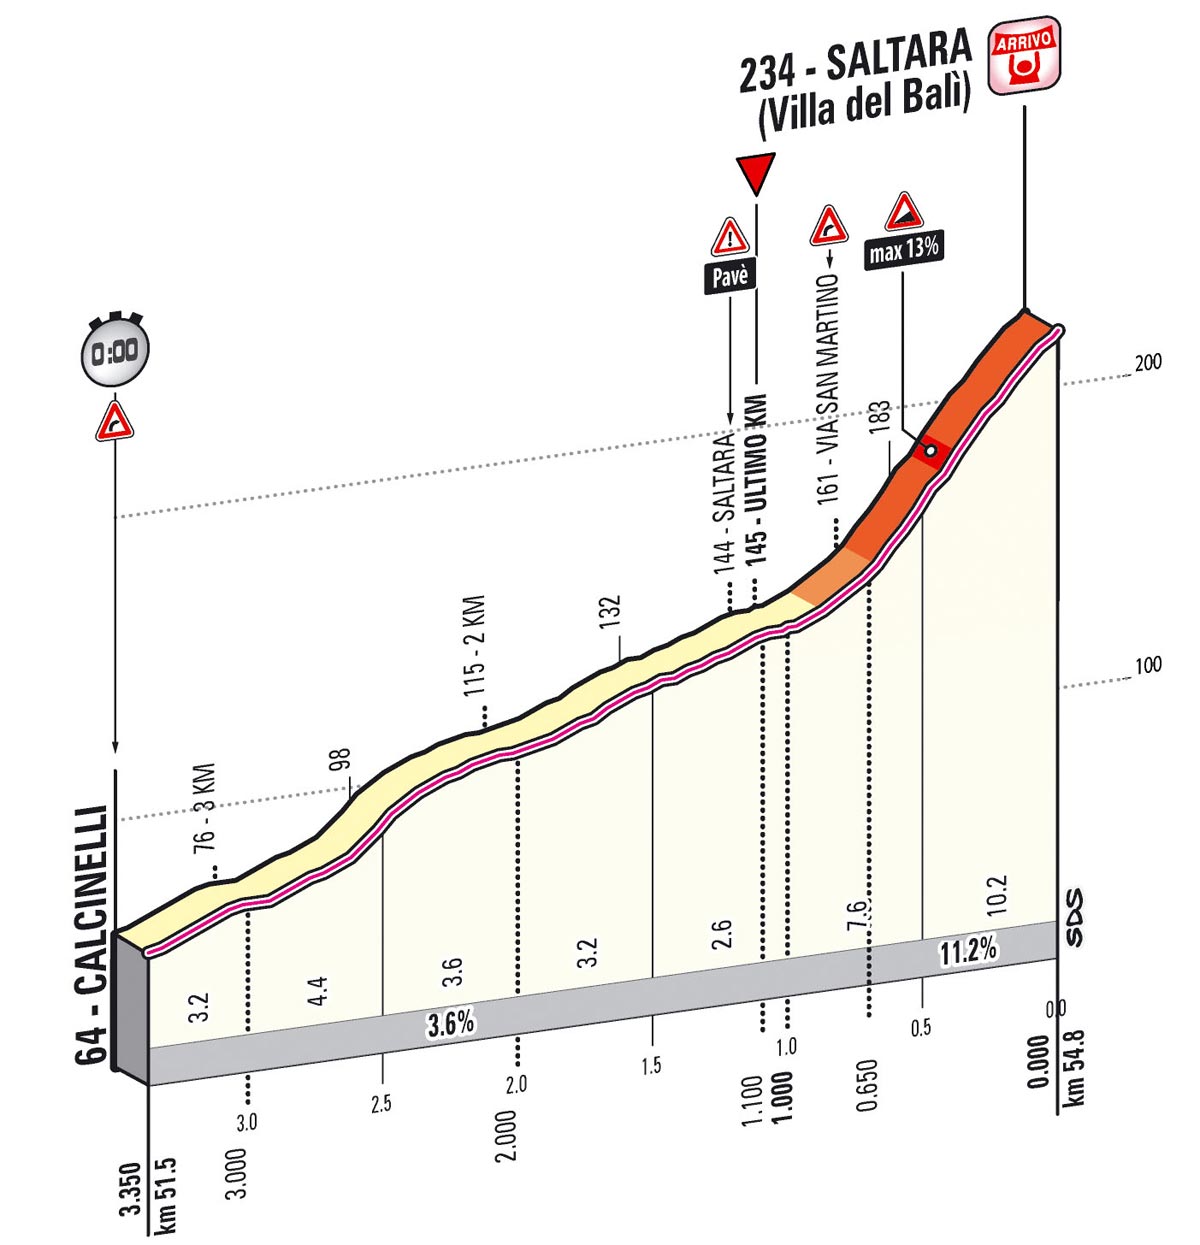 Giro Stage 8 Preview